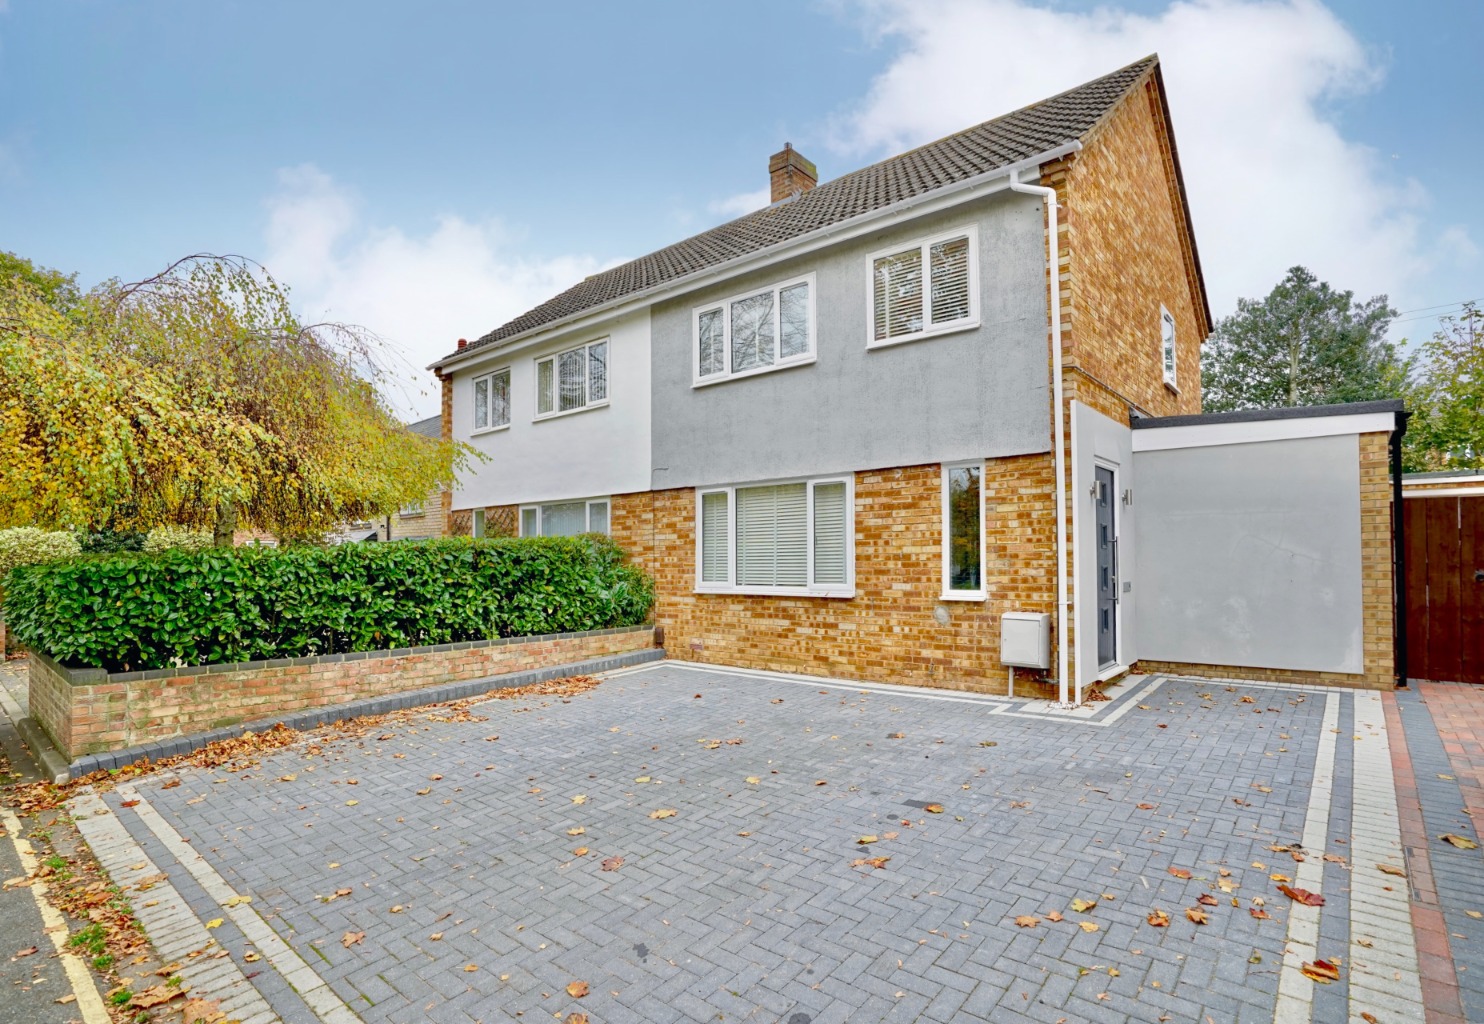 We are pleased to offer this stunning family home set within walking distance to both St Neots train station and all the amenities of the town centre. The fully refurbished home, set overlooking a green area has ample off road parking, a landscaped and well maintained rear garden.